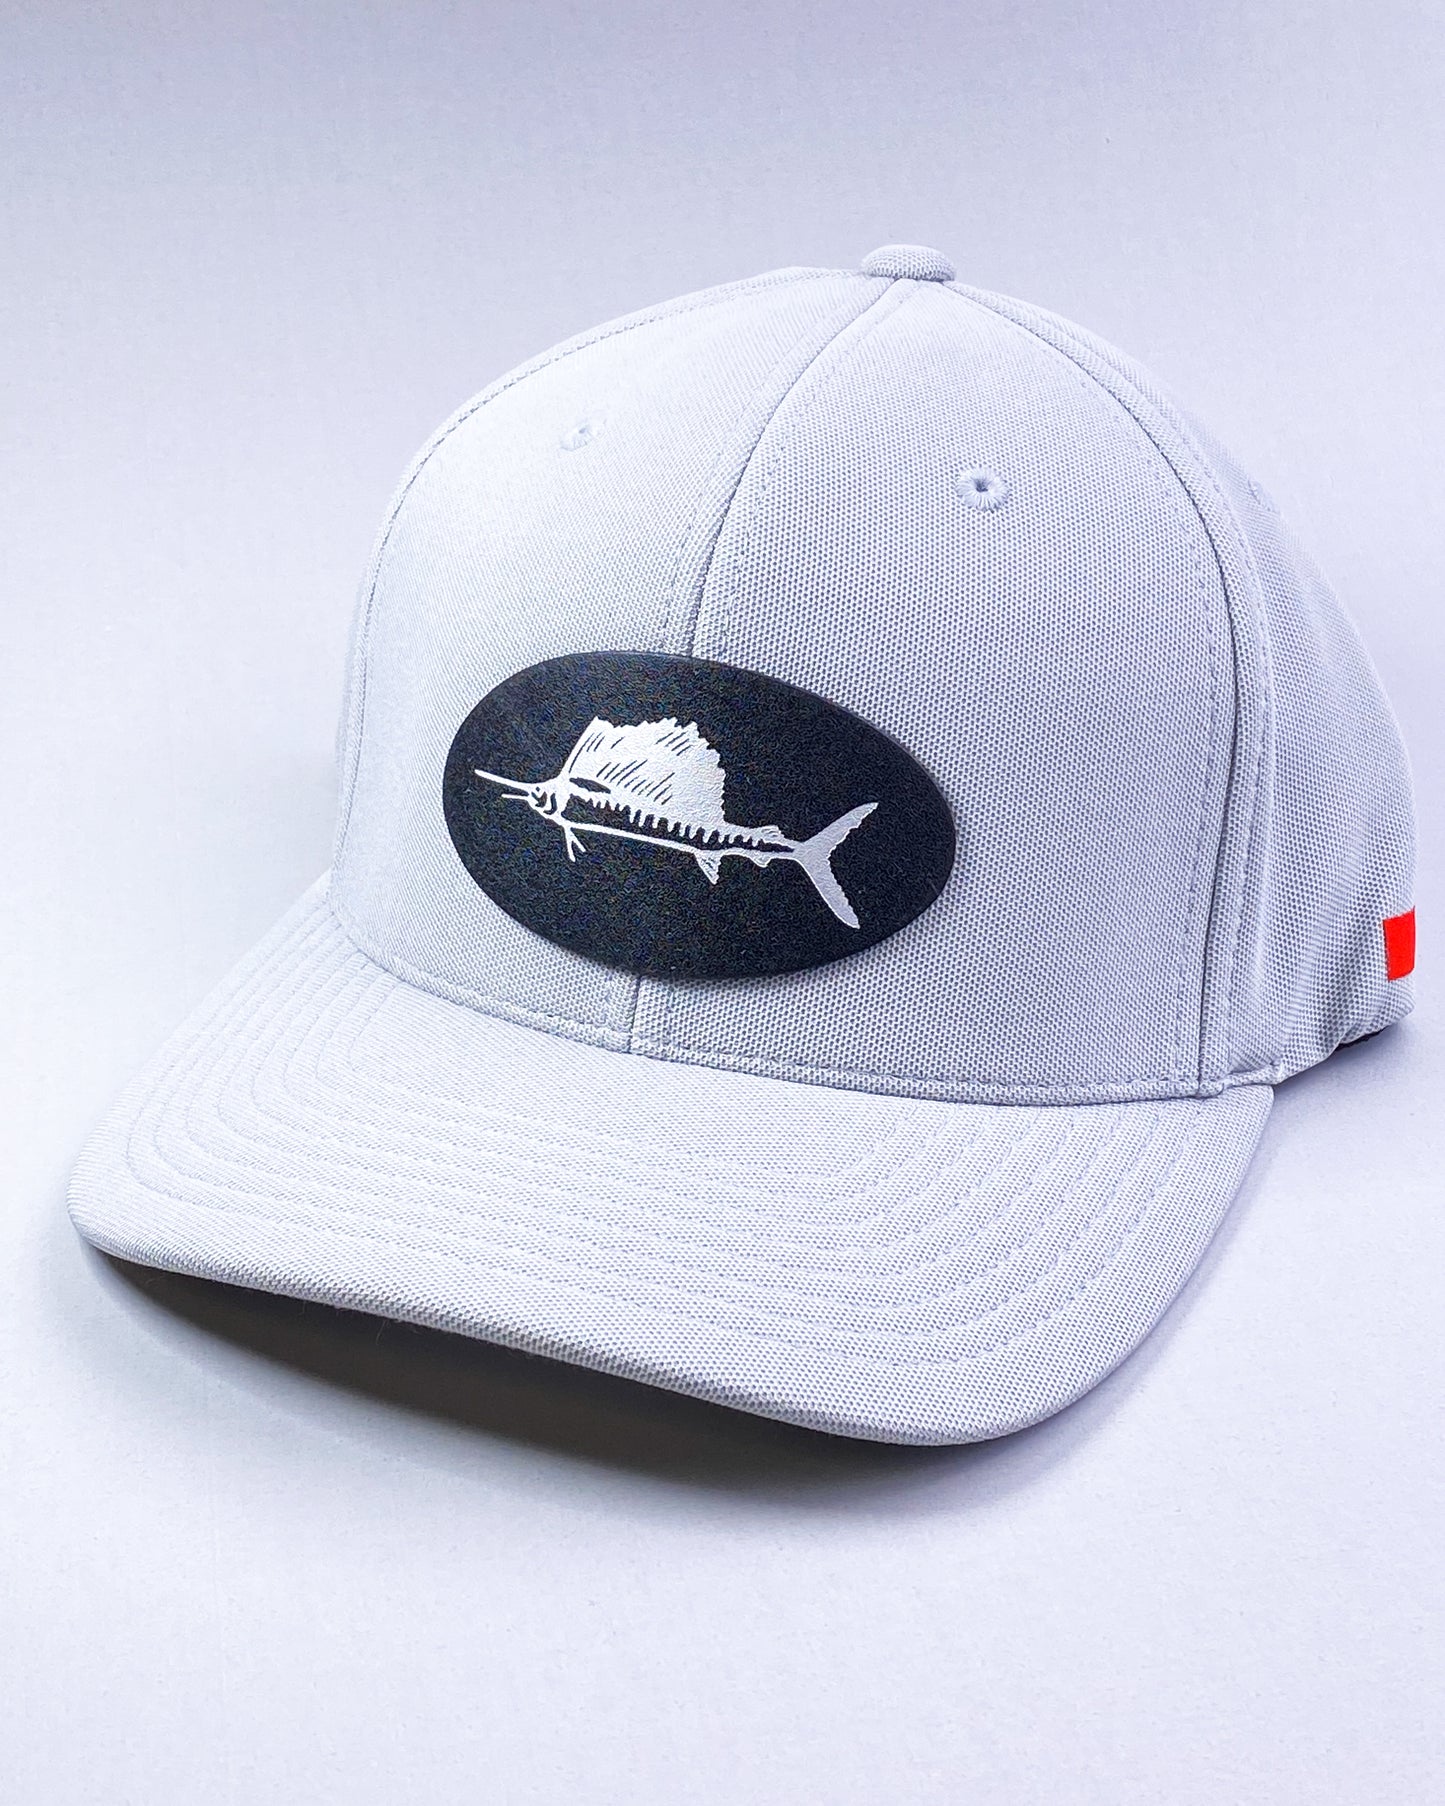 Bravo Premium hat in silver grey with sailfish design leather patch